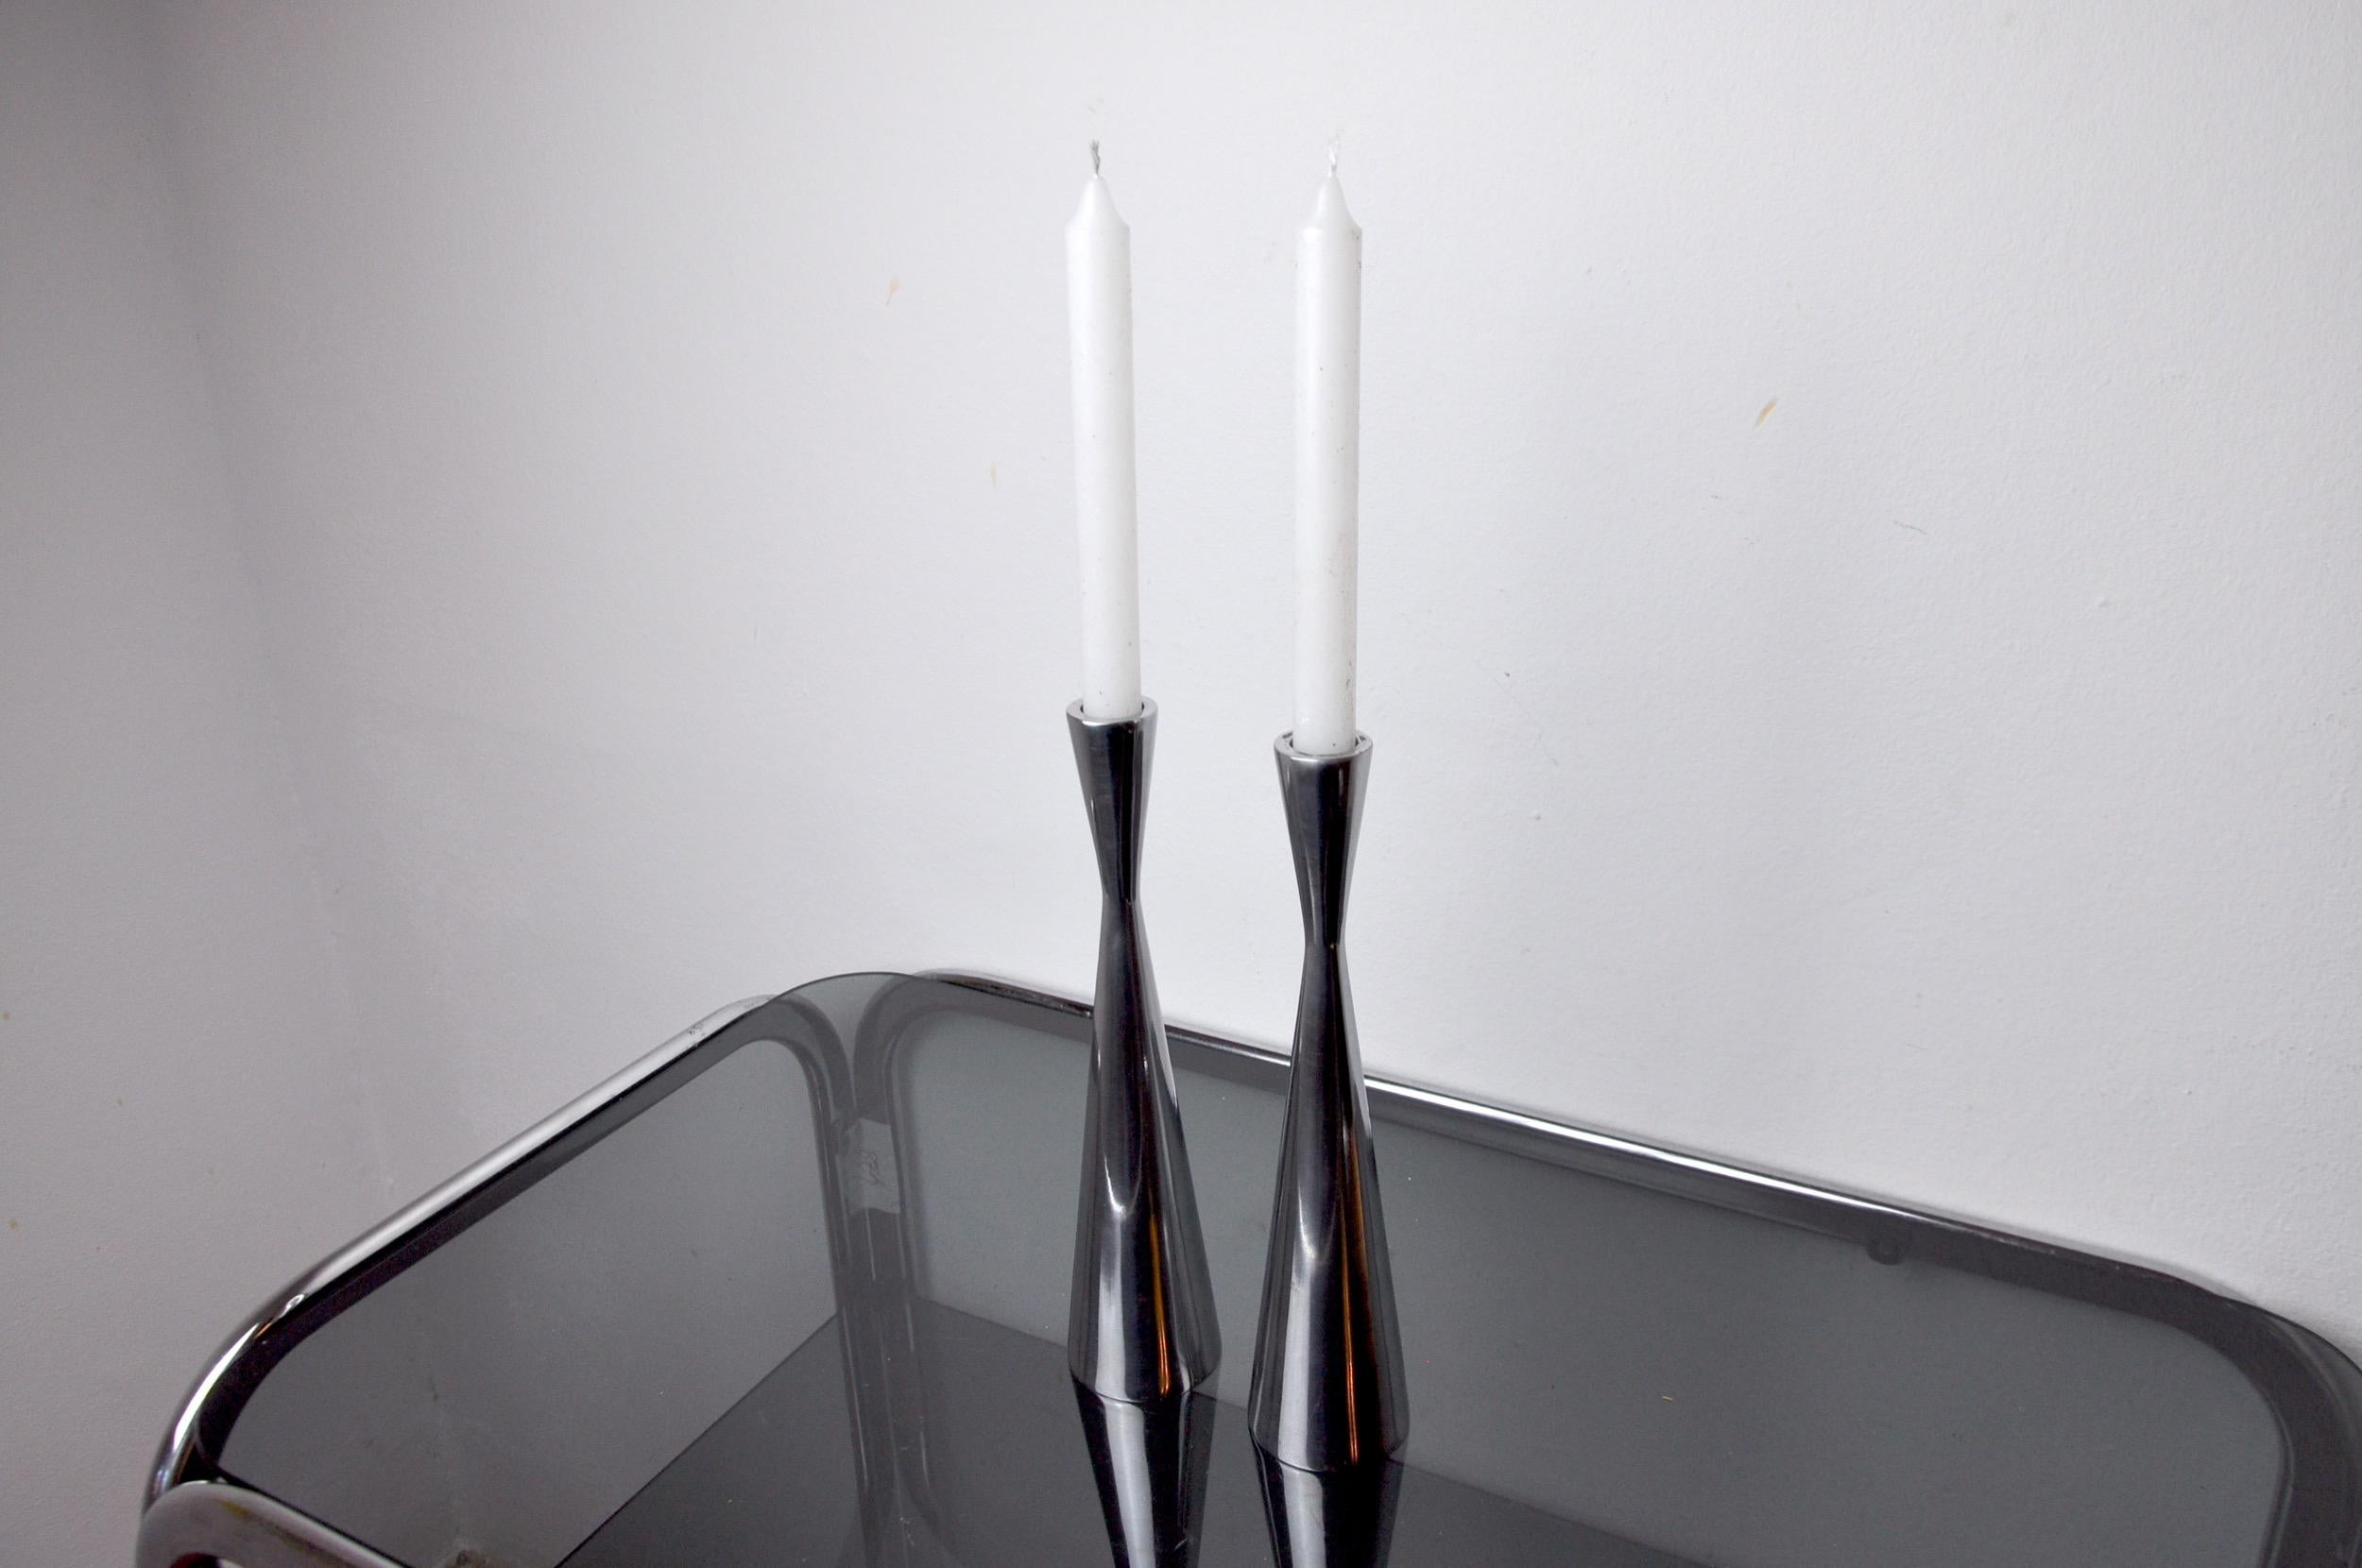 Superb pair of scandinavian diabolo candle holders designed and produced in finland in the 1970s.

Design objects in aluminum attributed to the famous finnish designer Tapio Wirkkala.

Rare design object will decorate your interior